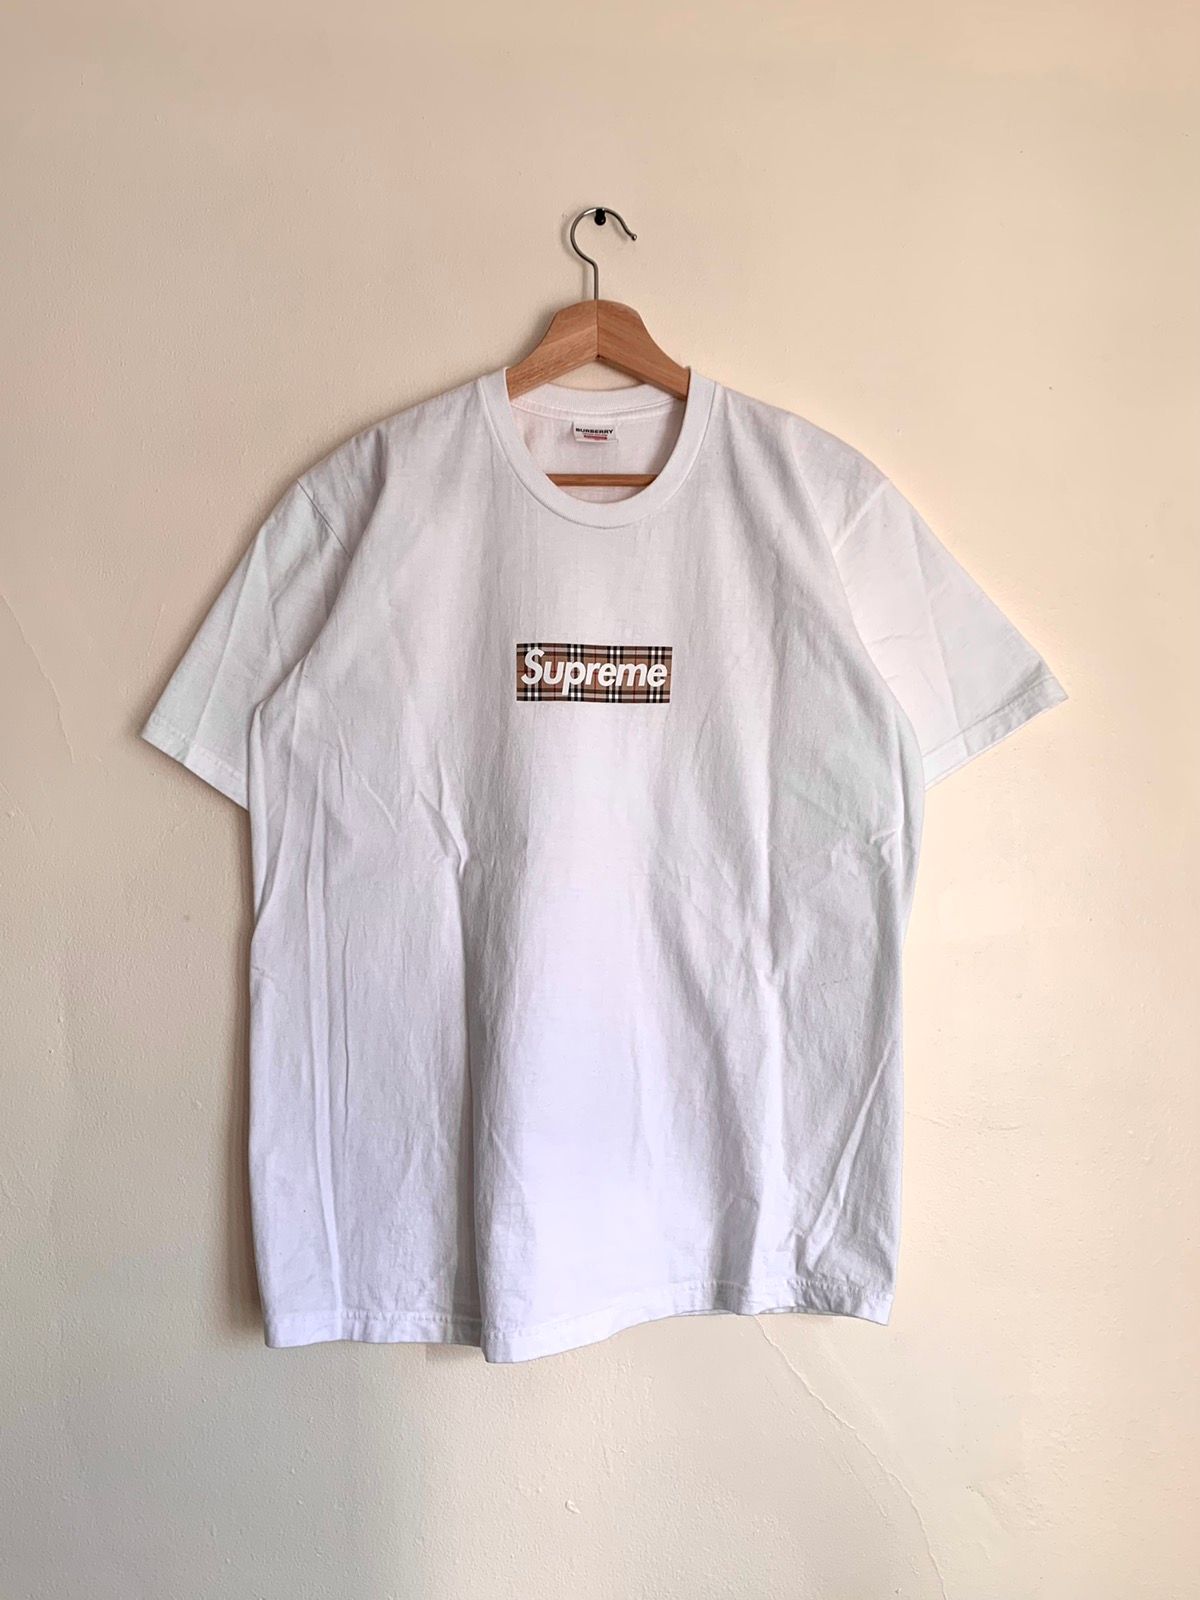 Pre-owned Burberry Supreme  Box Logo Tee Bogo Shirt In White